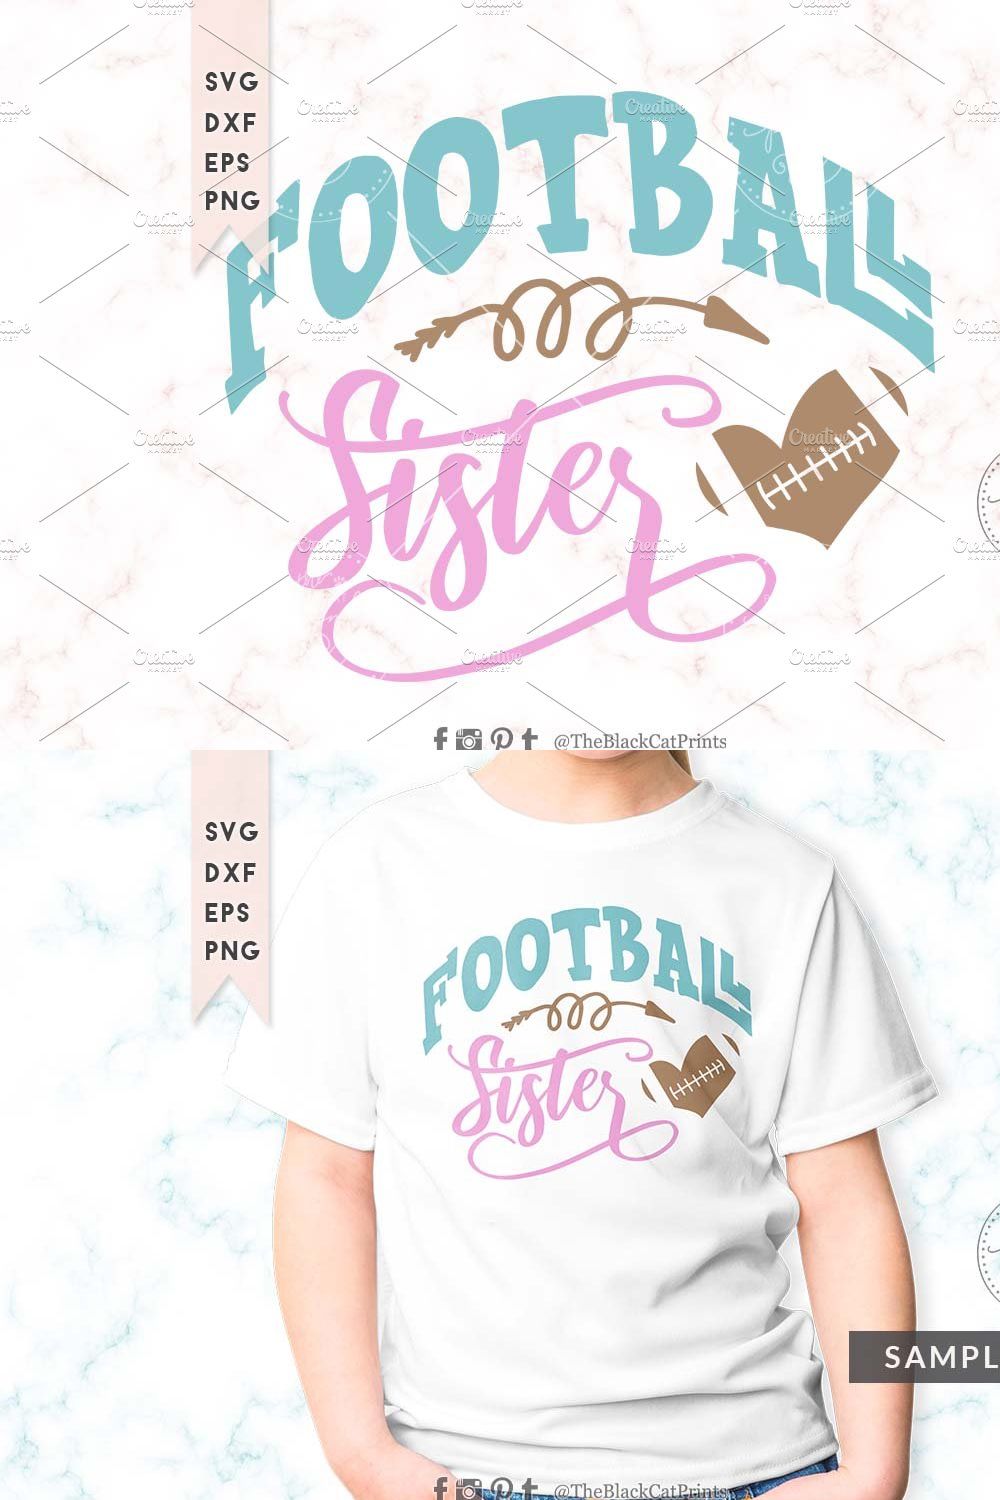 Football Sister SVG DXF EPS PNG pinterest preview image.